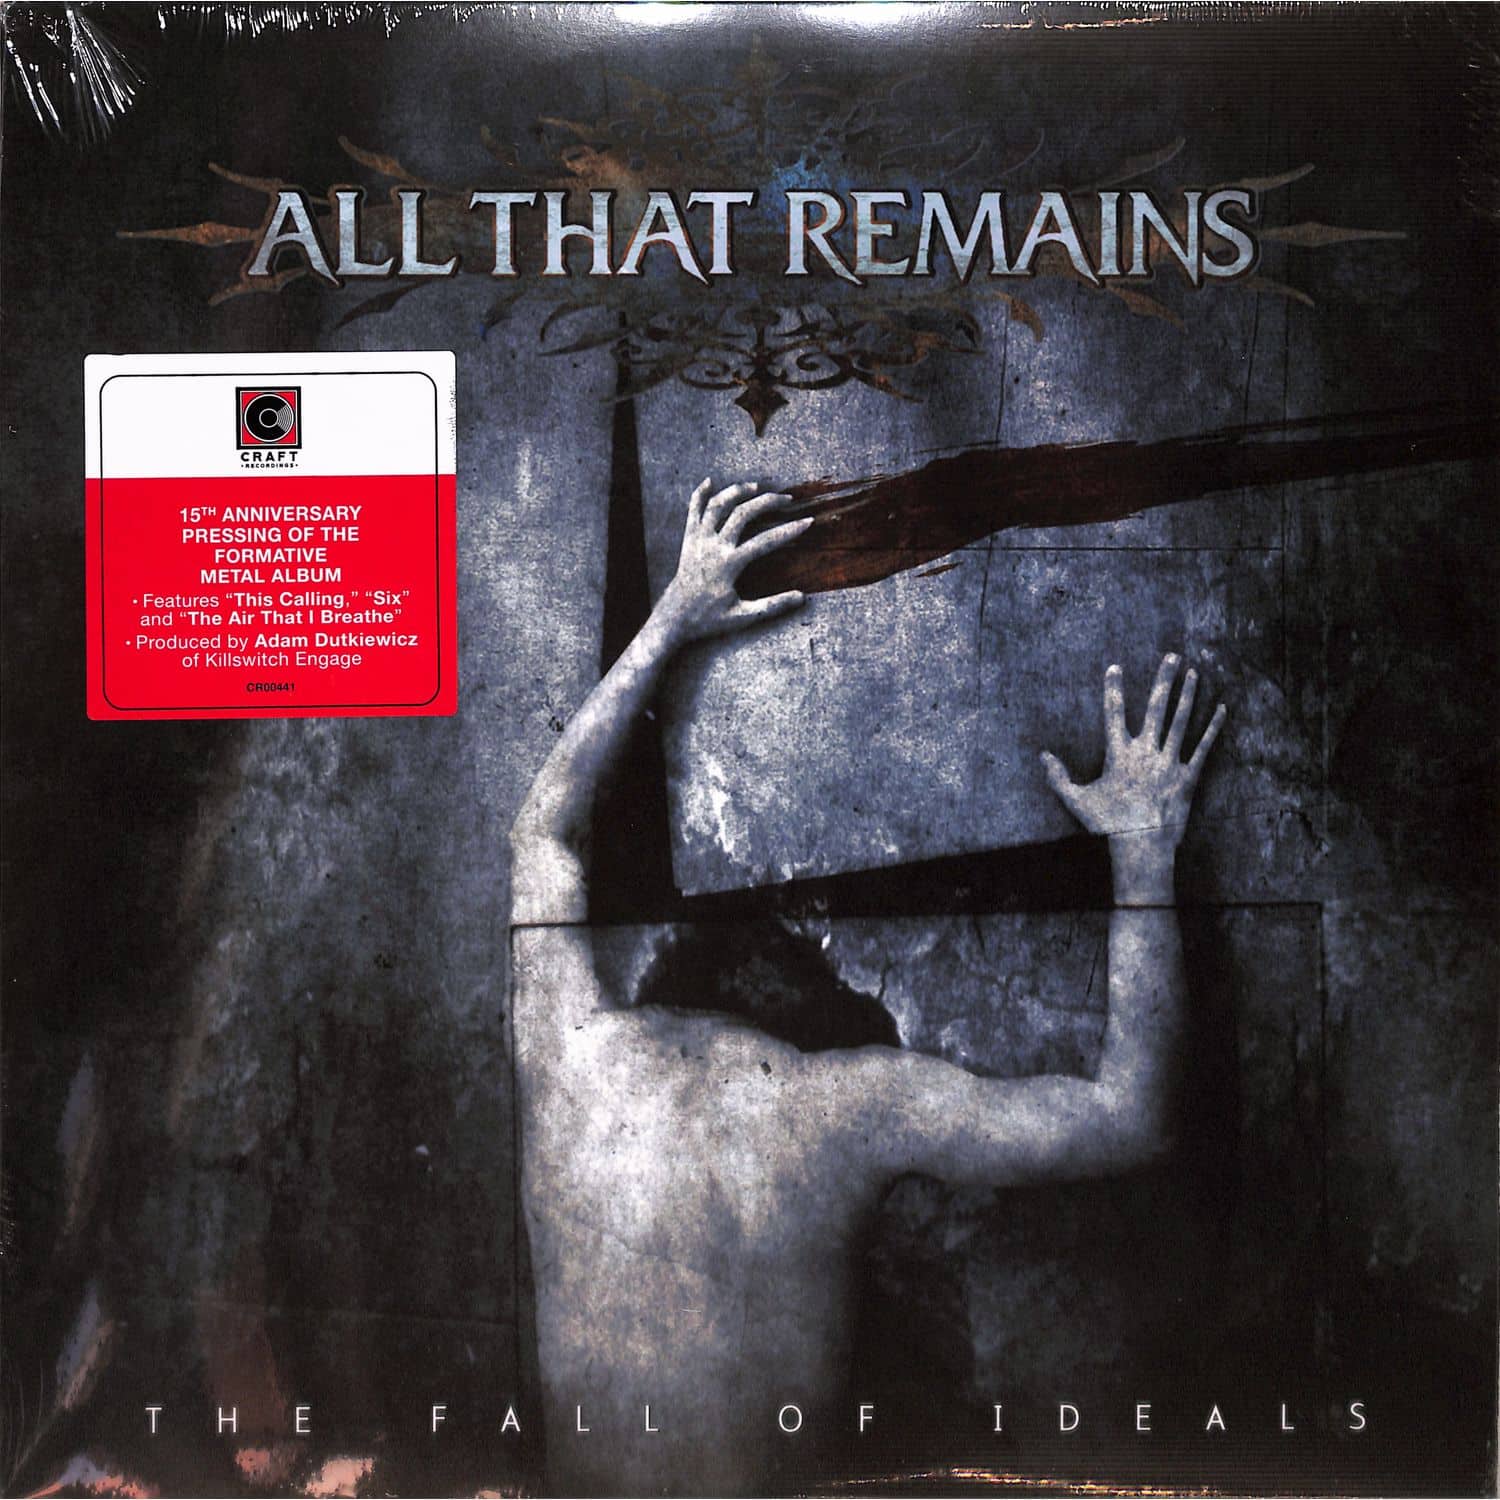 All That Remains - THE FALL OF IDEALS 